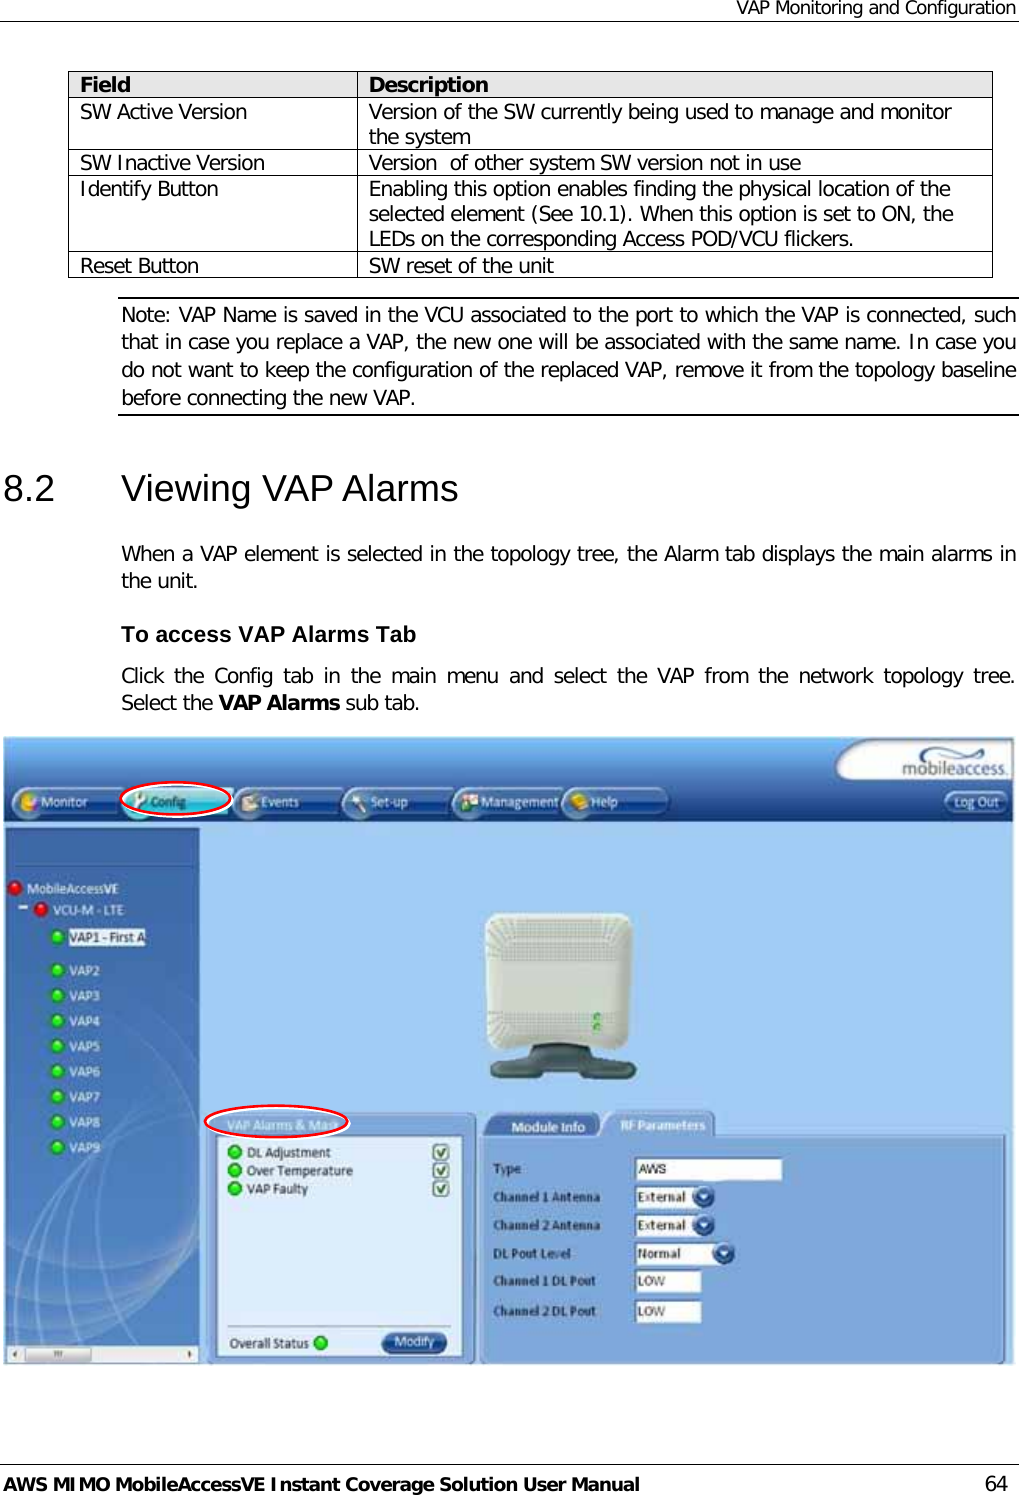 VAP Monitoring and Configuration AWS MIMO MobileAccessVE Instant Coverage Solution User Manual  64 Field Description SW Active Version Version of the SW currently being used to manage and monitor the system SW Inactive Version Version  of other system SW version not in use Identify Button Enabling this option enables finding the physical location of the selected element (See  10.1). When this option is set to ON, the LEDs on the corresponding Access POD/VCU flickers. Reset Button SW reset of the unit Note: VAP Name is saved in the VCU associated to the port to which the VAP is connected, such that in case you replace a VAP, the new one will be associated with the same name. In case you do not want to keep the configuration of the replaced VAP, remove it from the topology baseline before connecting the new VAP. 8.2  Viewing VAP Alarms  When a VAP element is selected in the topology tree, the Alarm tab displays the main alarms in the unit. To access VAP Alarms Tab  Click the Config tab in the main menu and select the VAP from the network topology tree.  Select the VAP Alarms sub tab.  